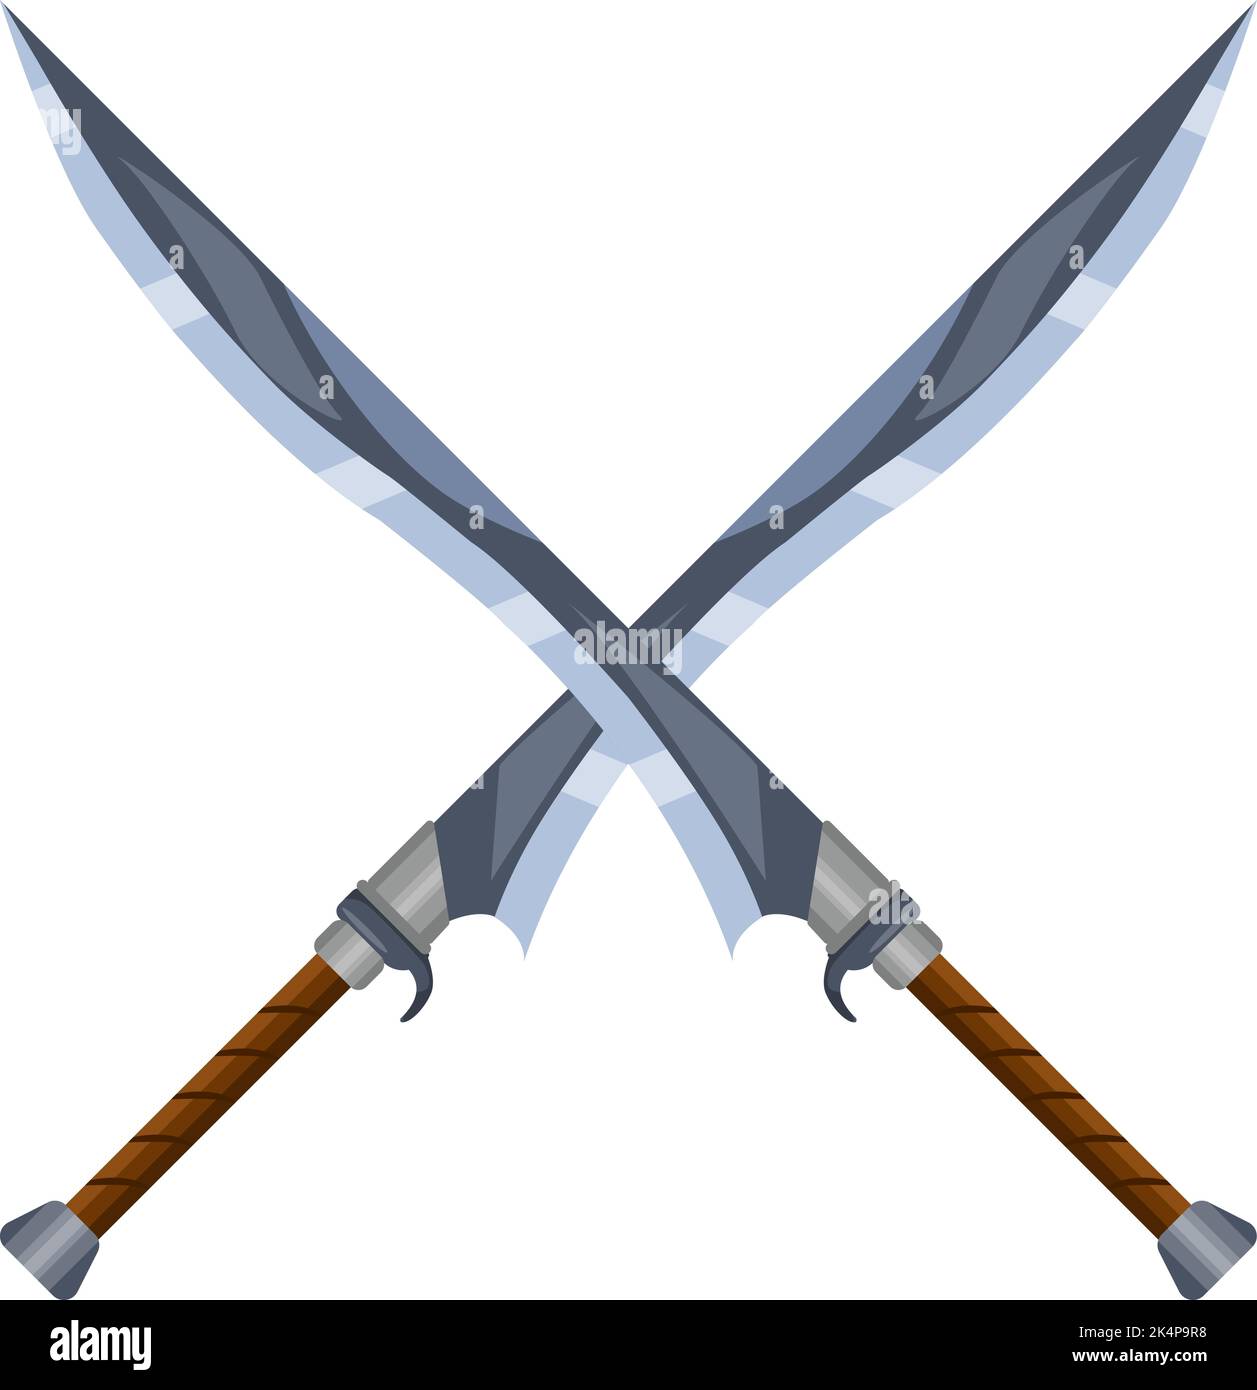 Metal swords, illustration, vector on a white background. Stock Vector